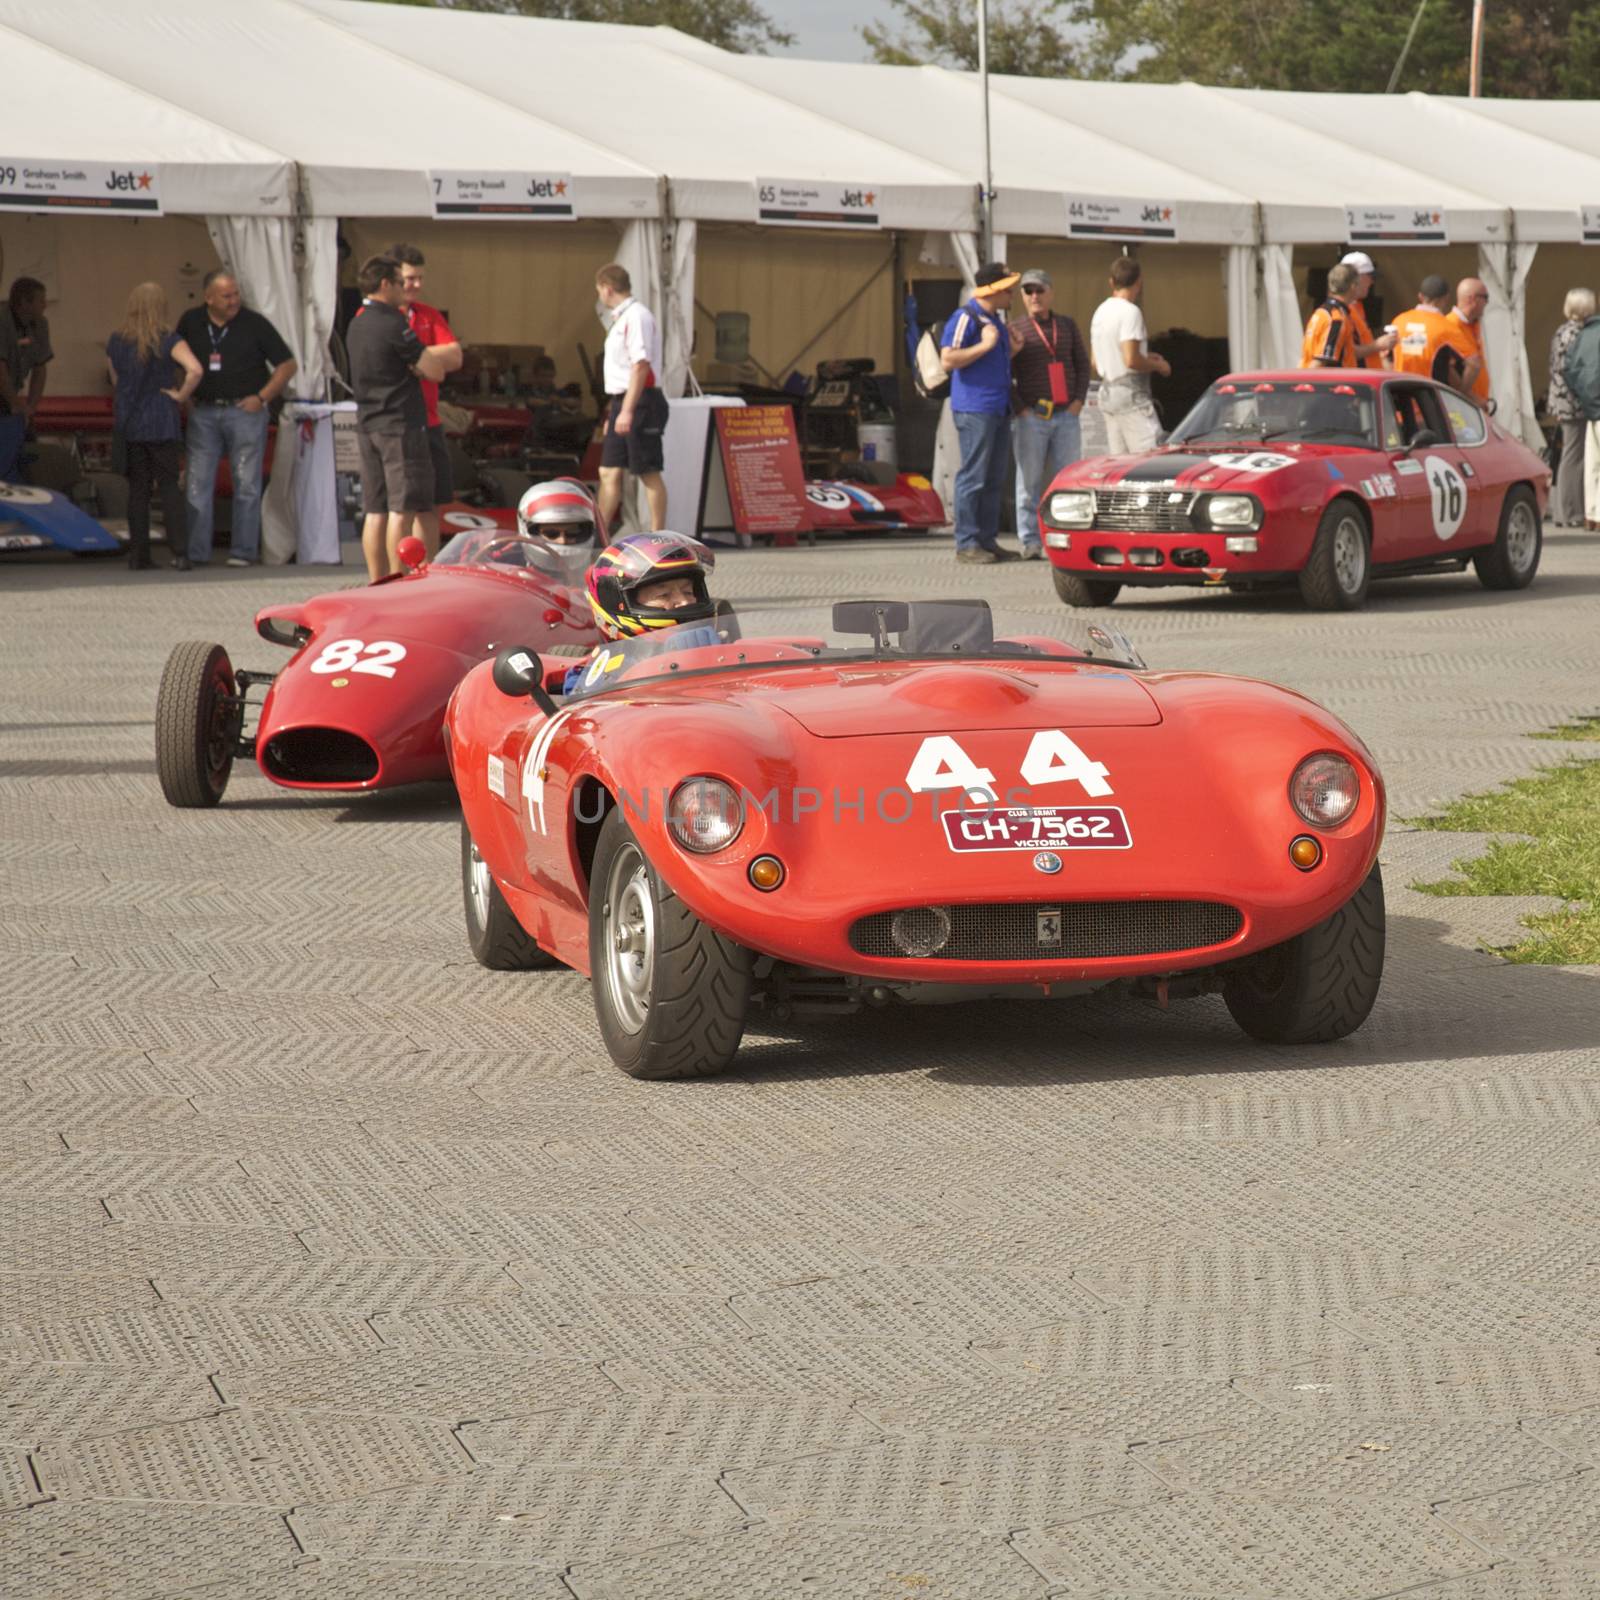 Alfa antique in Melbourne Grand Prix Grounds one of the Viewing Areas, 2010